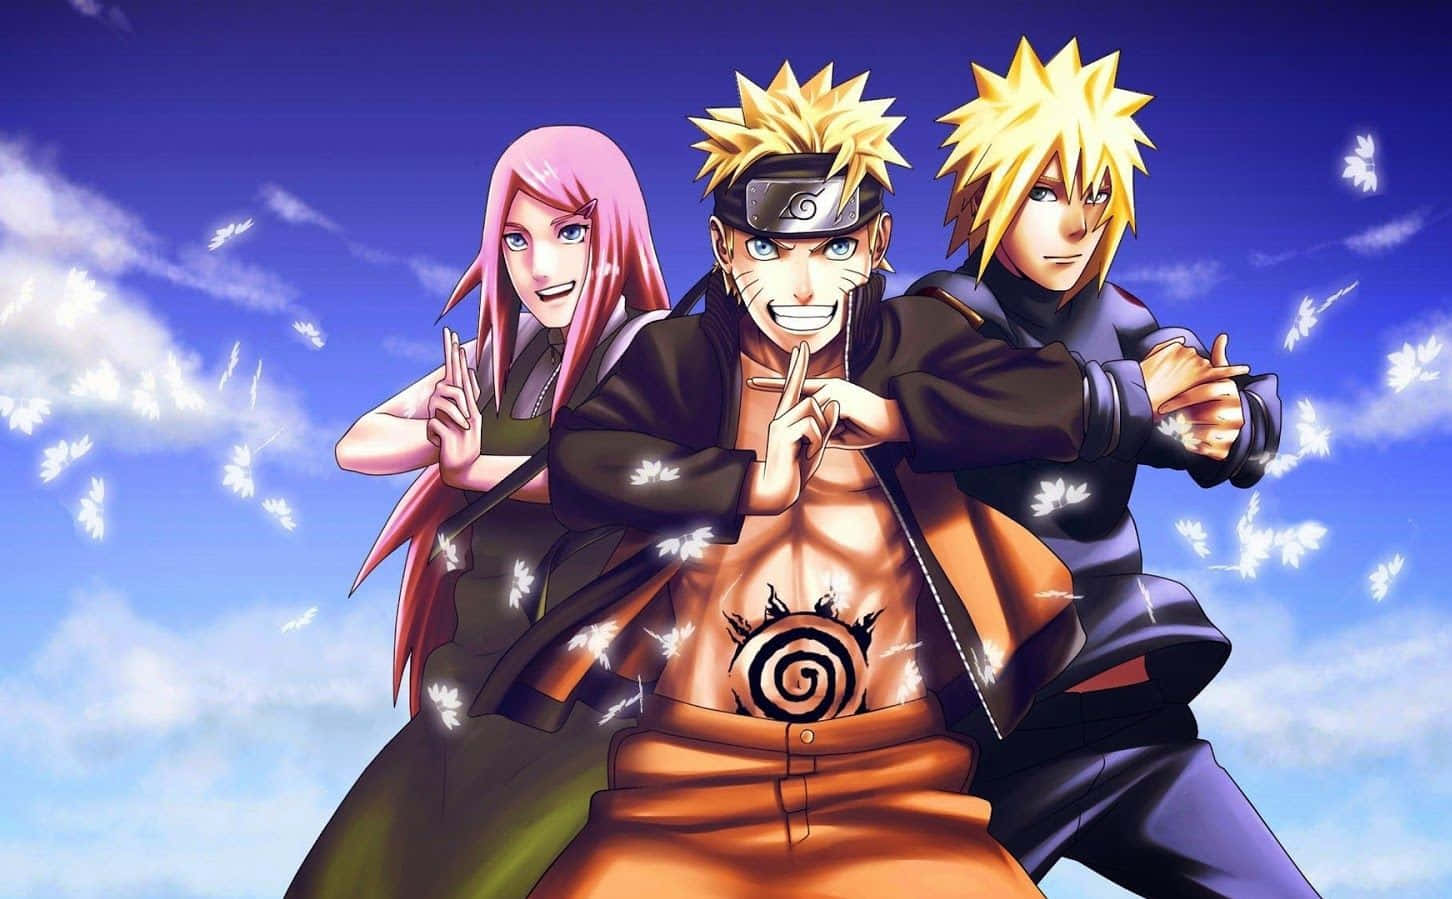 Naruto and his friends sharing a fun moment together Wallpaper